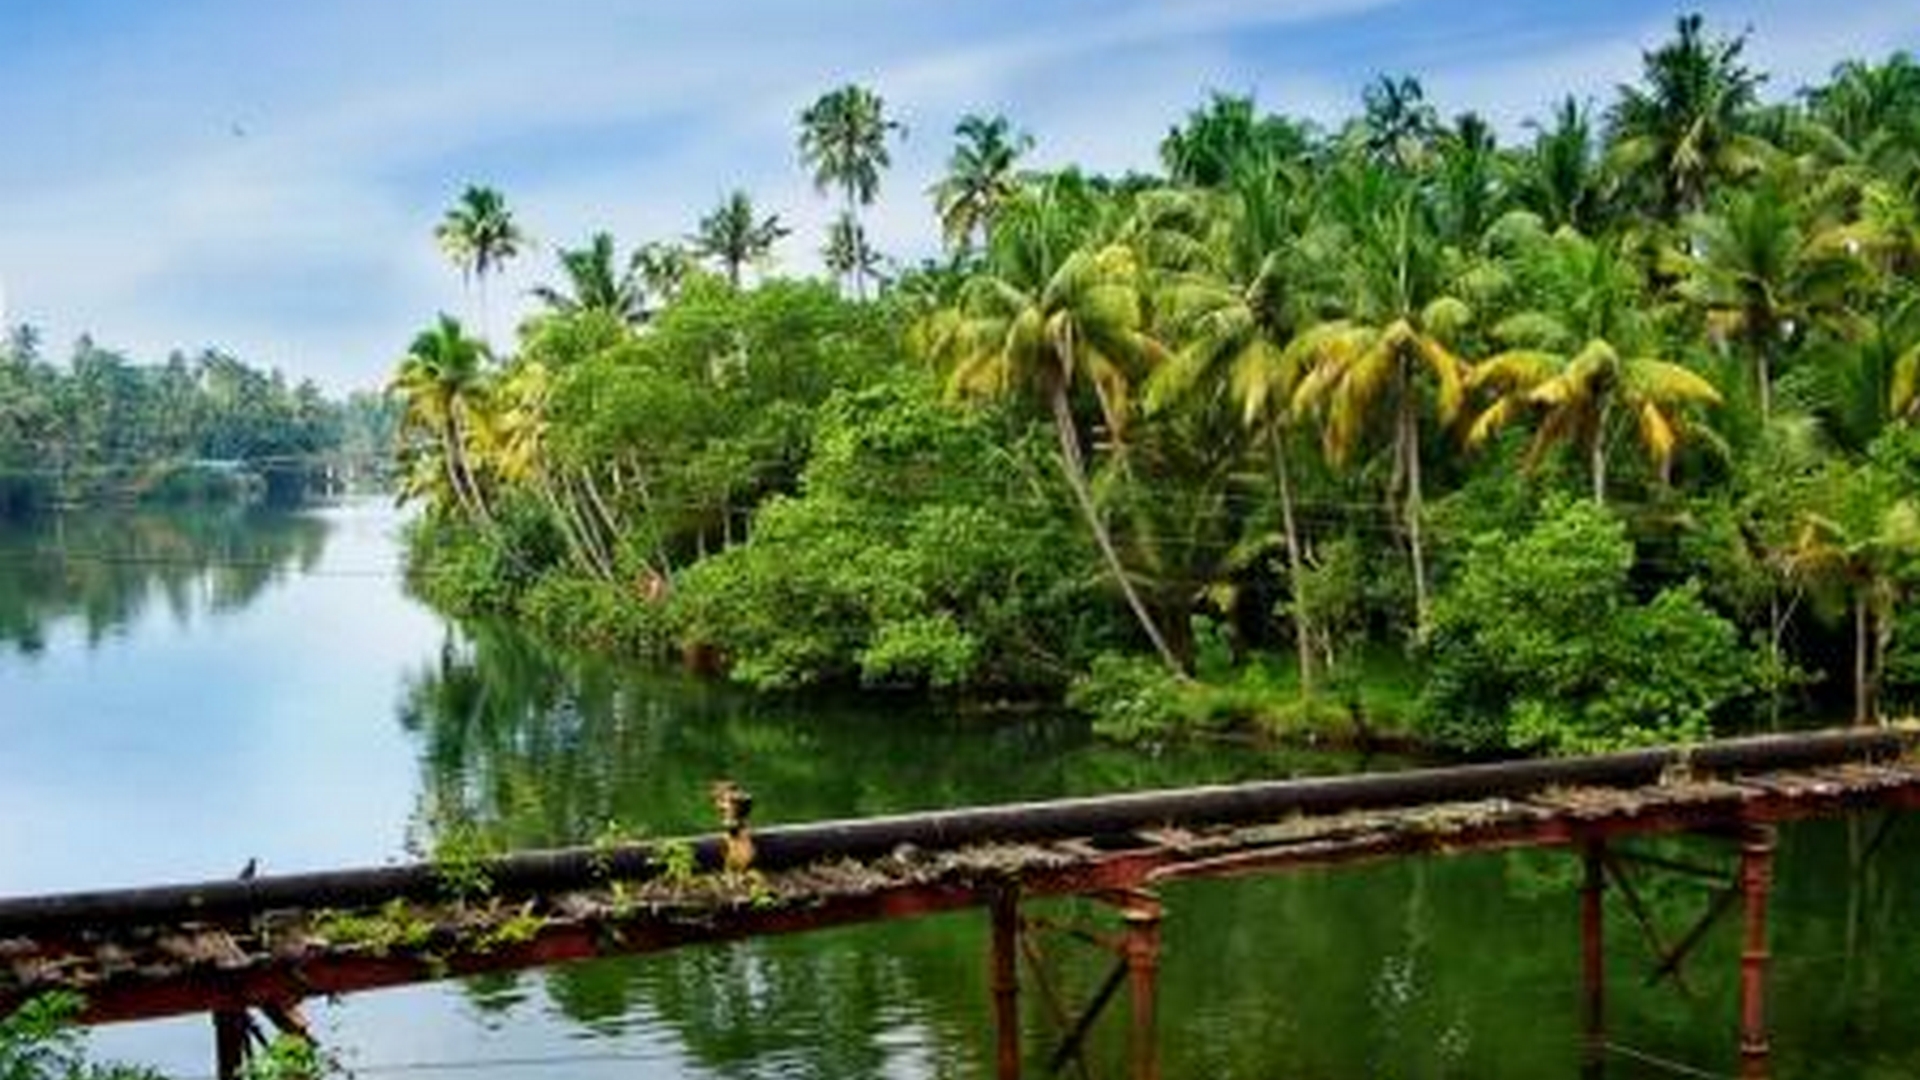 kollam famous tourist attractions